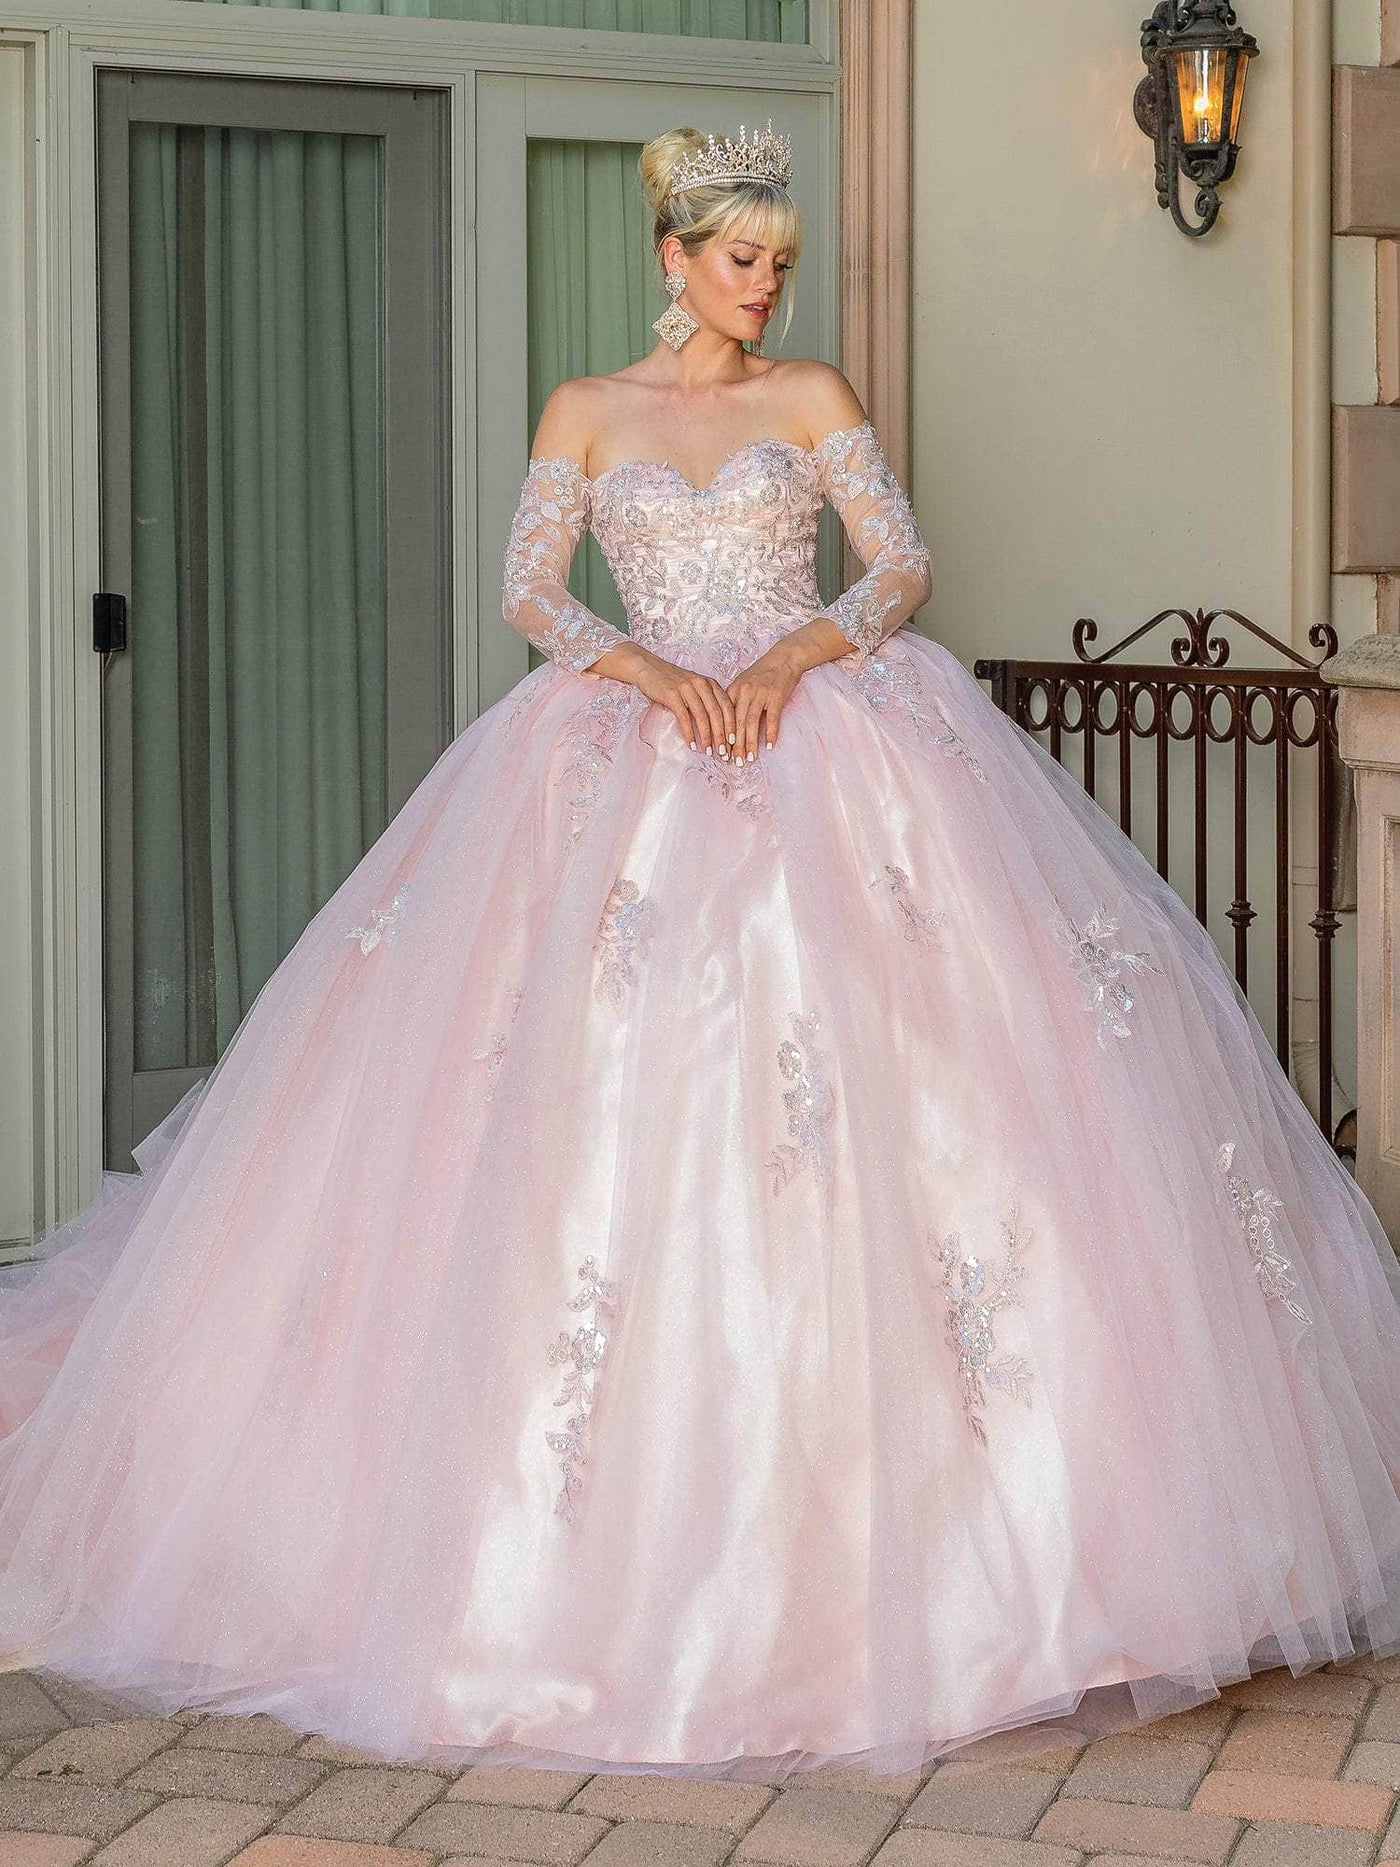 Dancing Queen 1674 - Floral Embroidered Sweetheart Ballgown Quinceanera Dresses